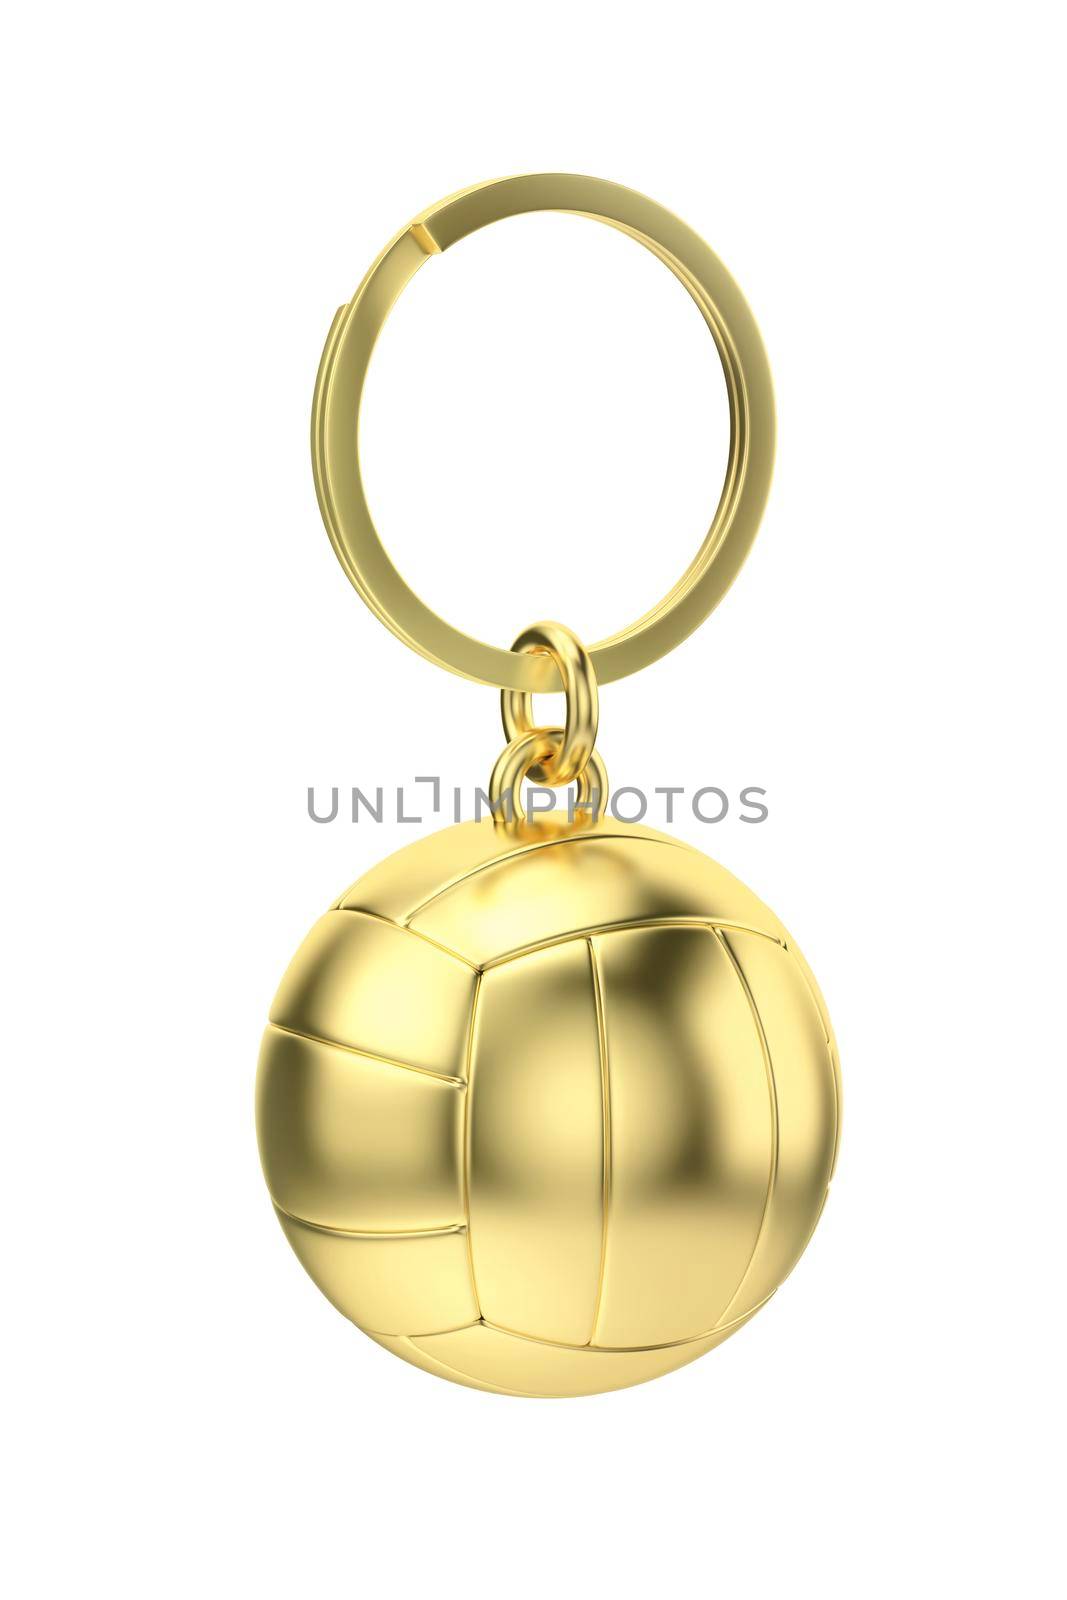 Gold keychain with volleyball ball isolated on white background